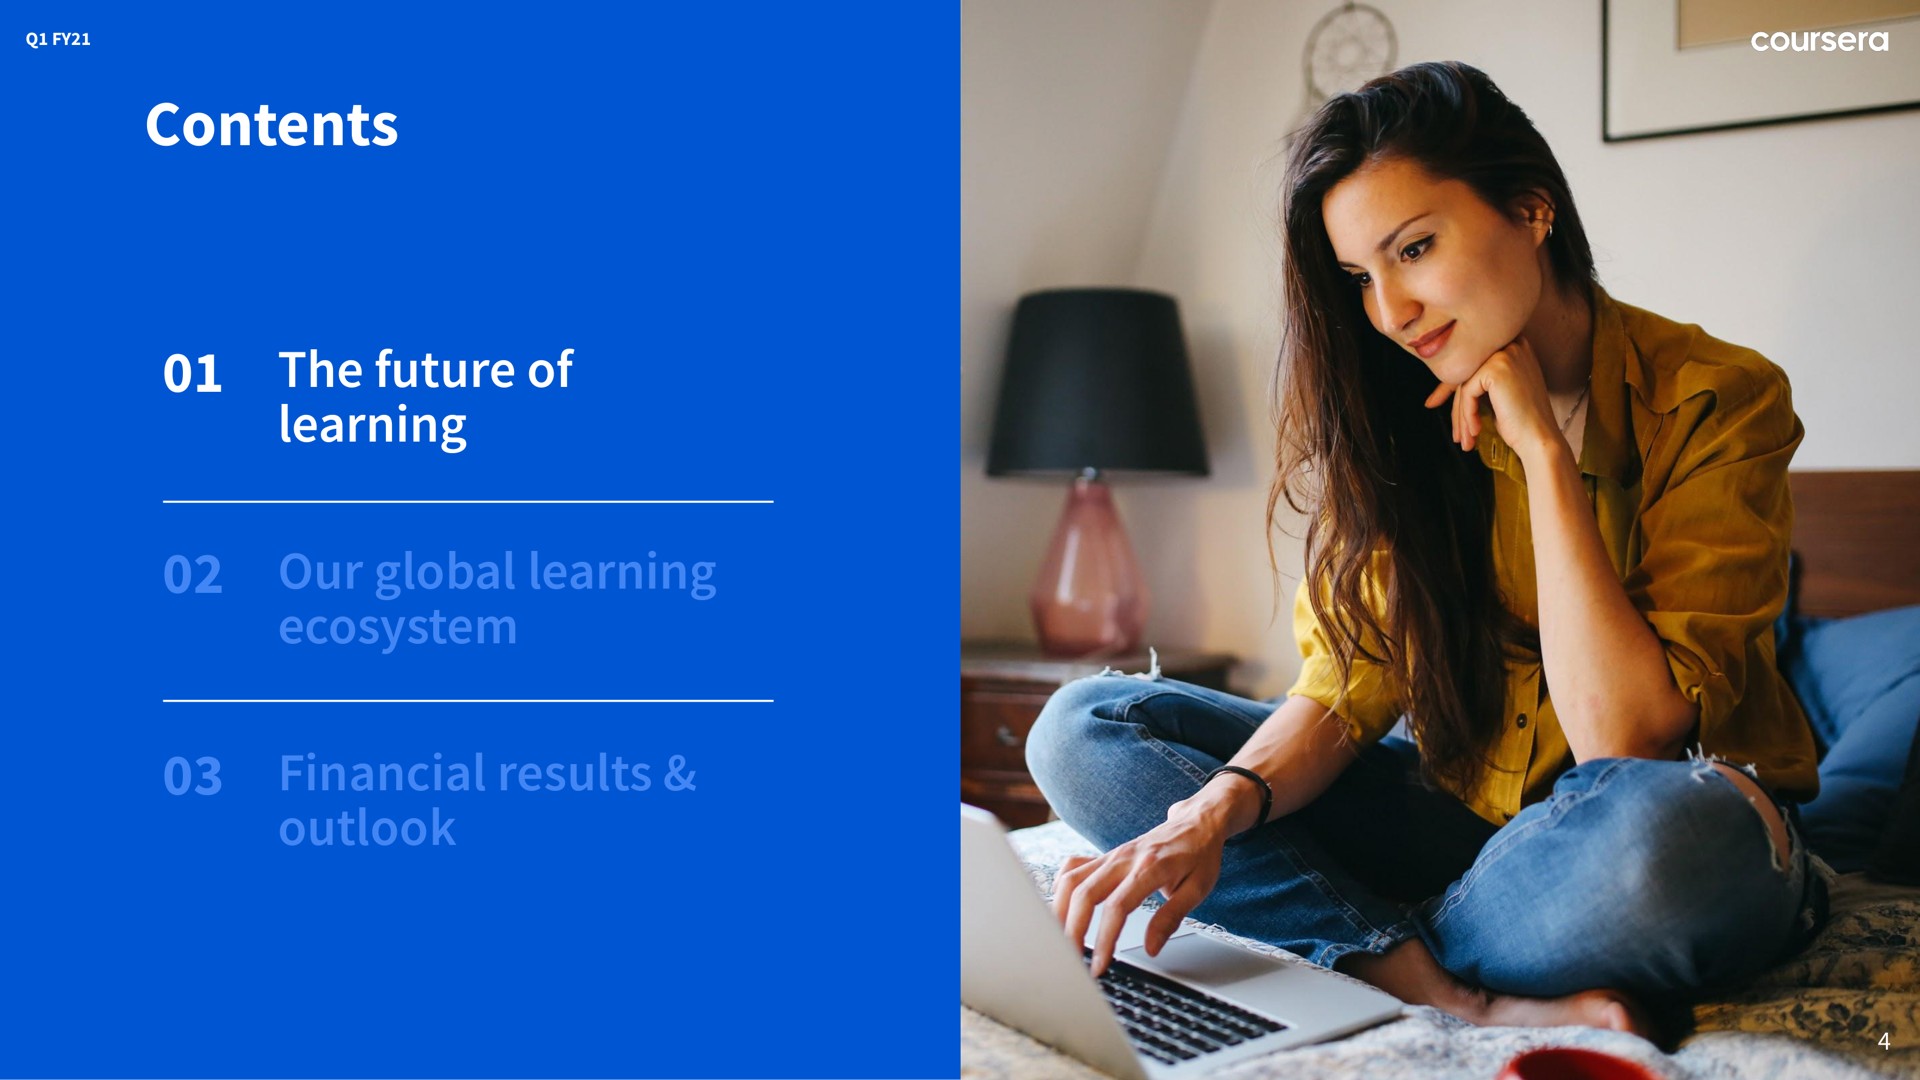 learning our global learning | Coursera